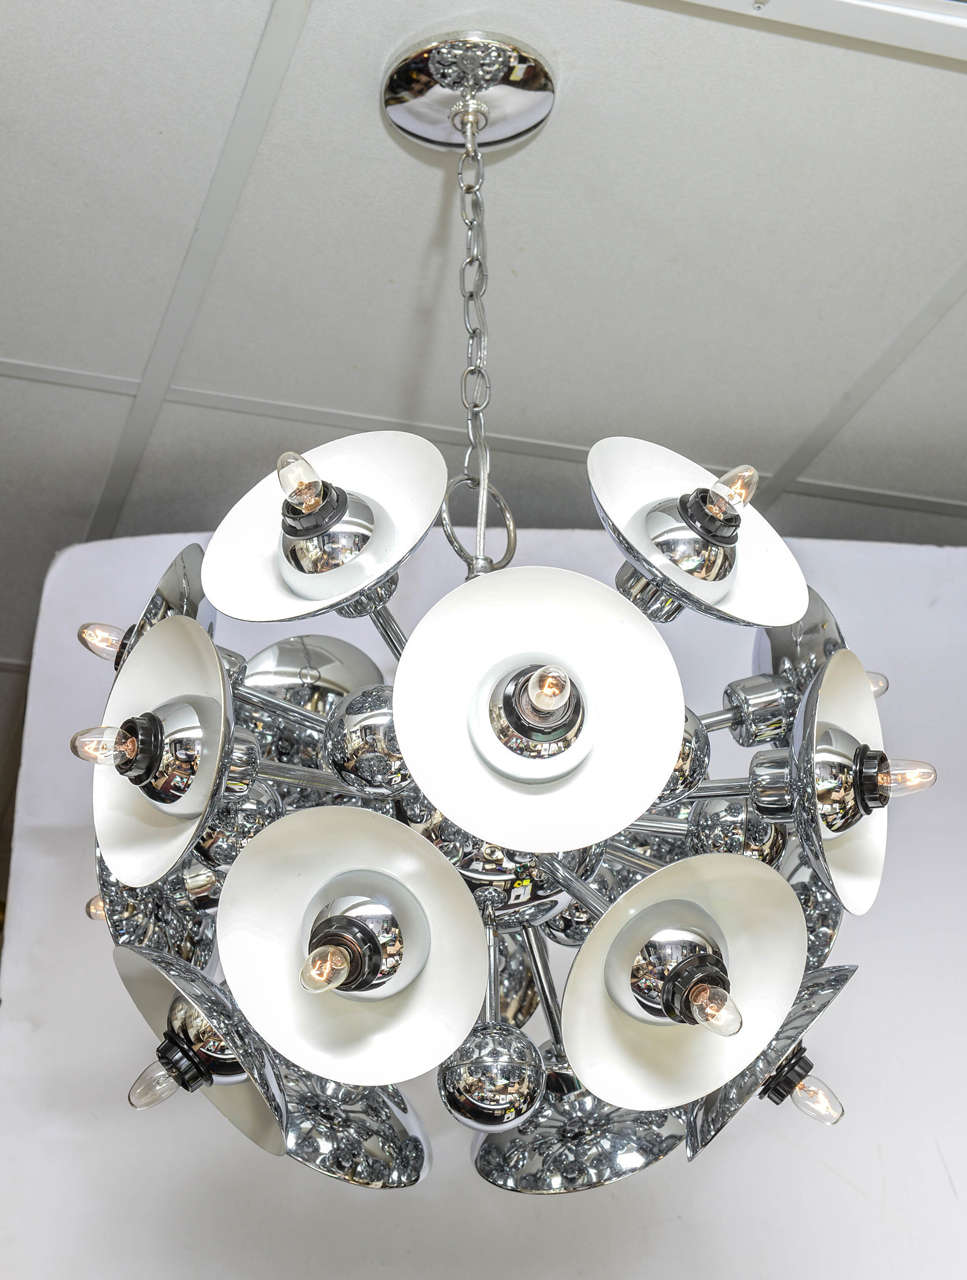 Eighteen chrome saucers on Sputnik arms and spheres throughout. Lots of glam!
 